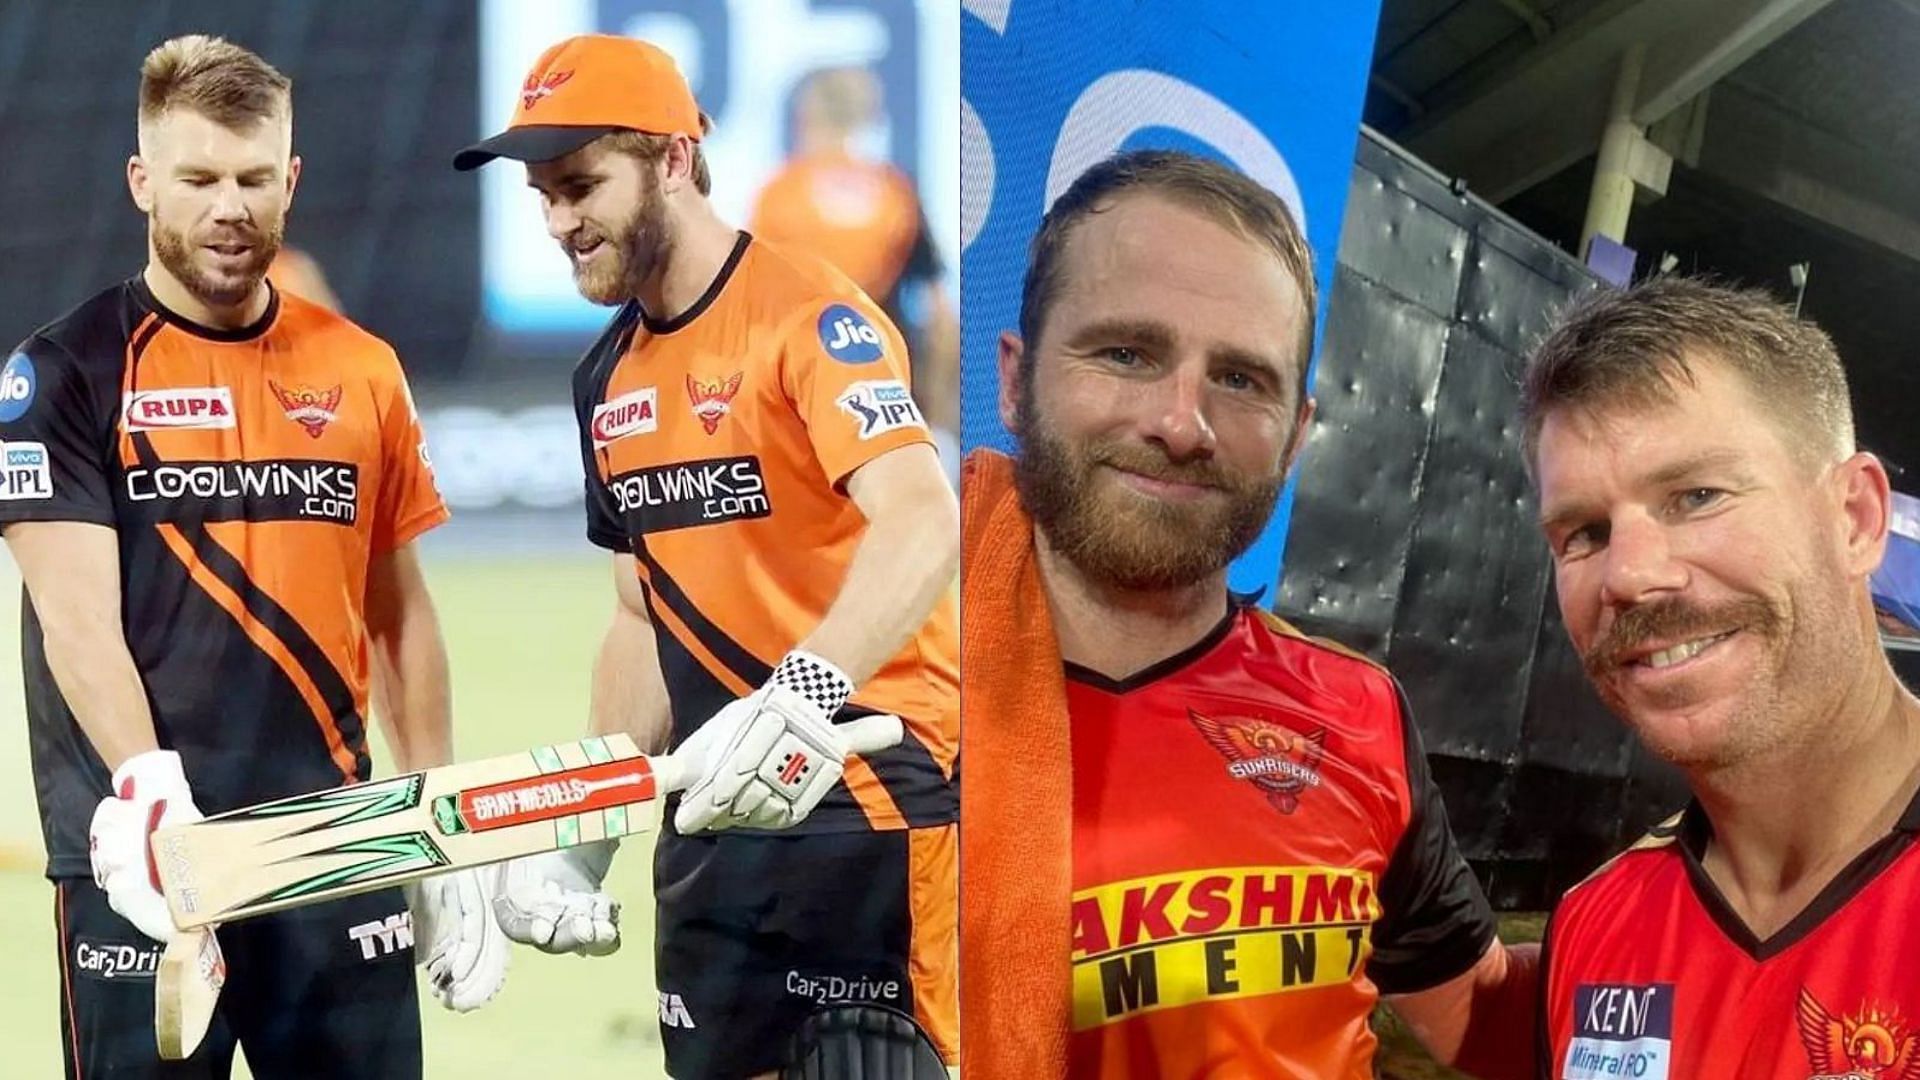 David Warner and Kane Williamson played together for the Sunrisers Hyderabad from 2015 to 2021